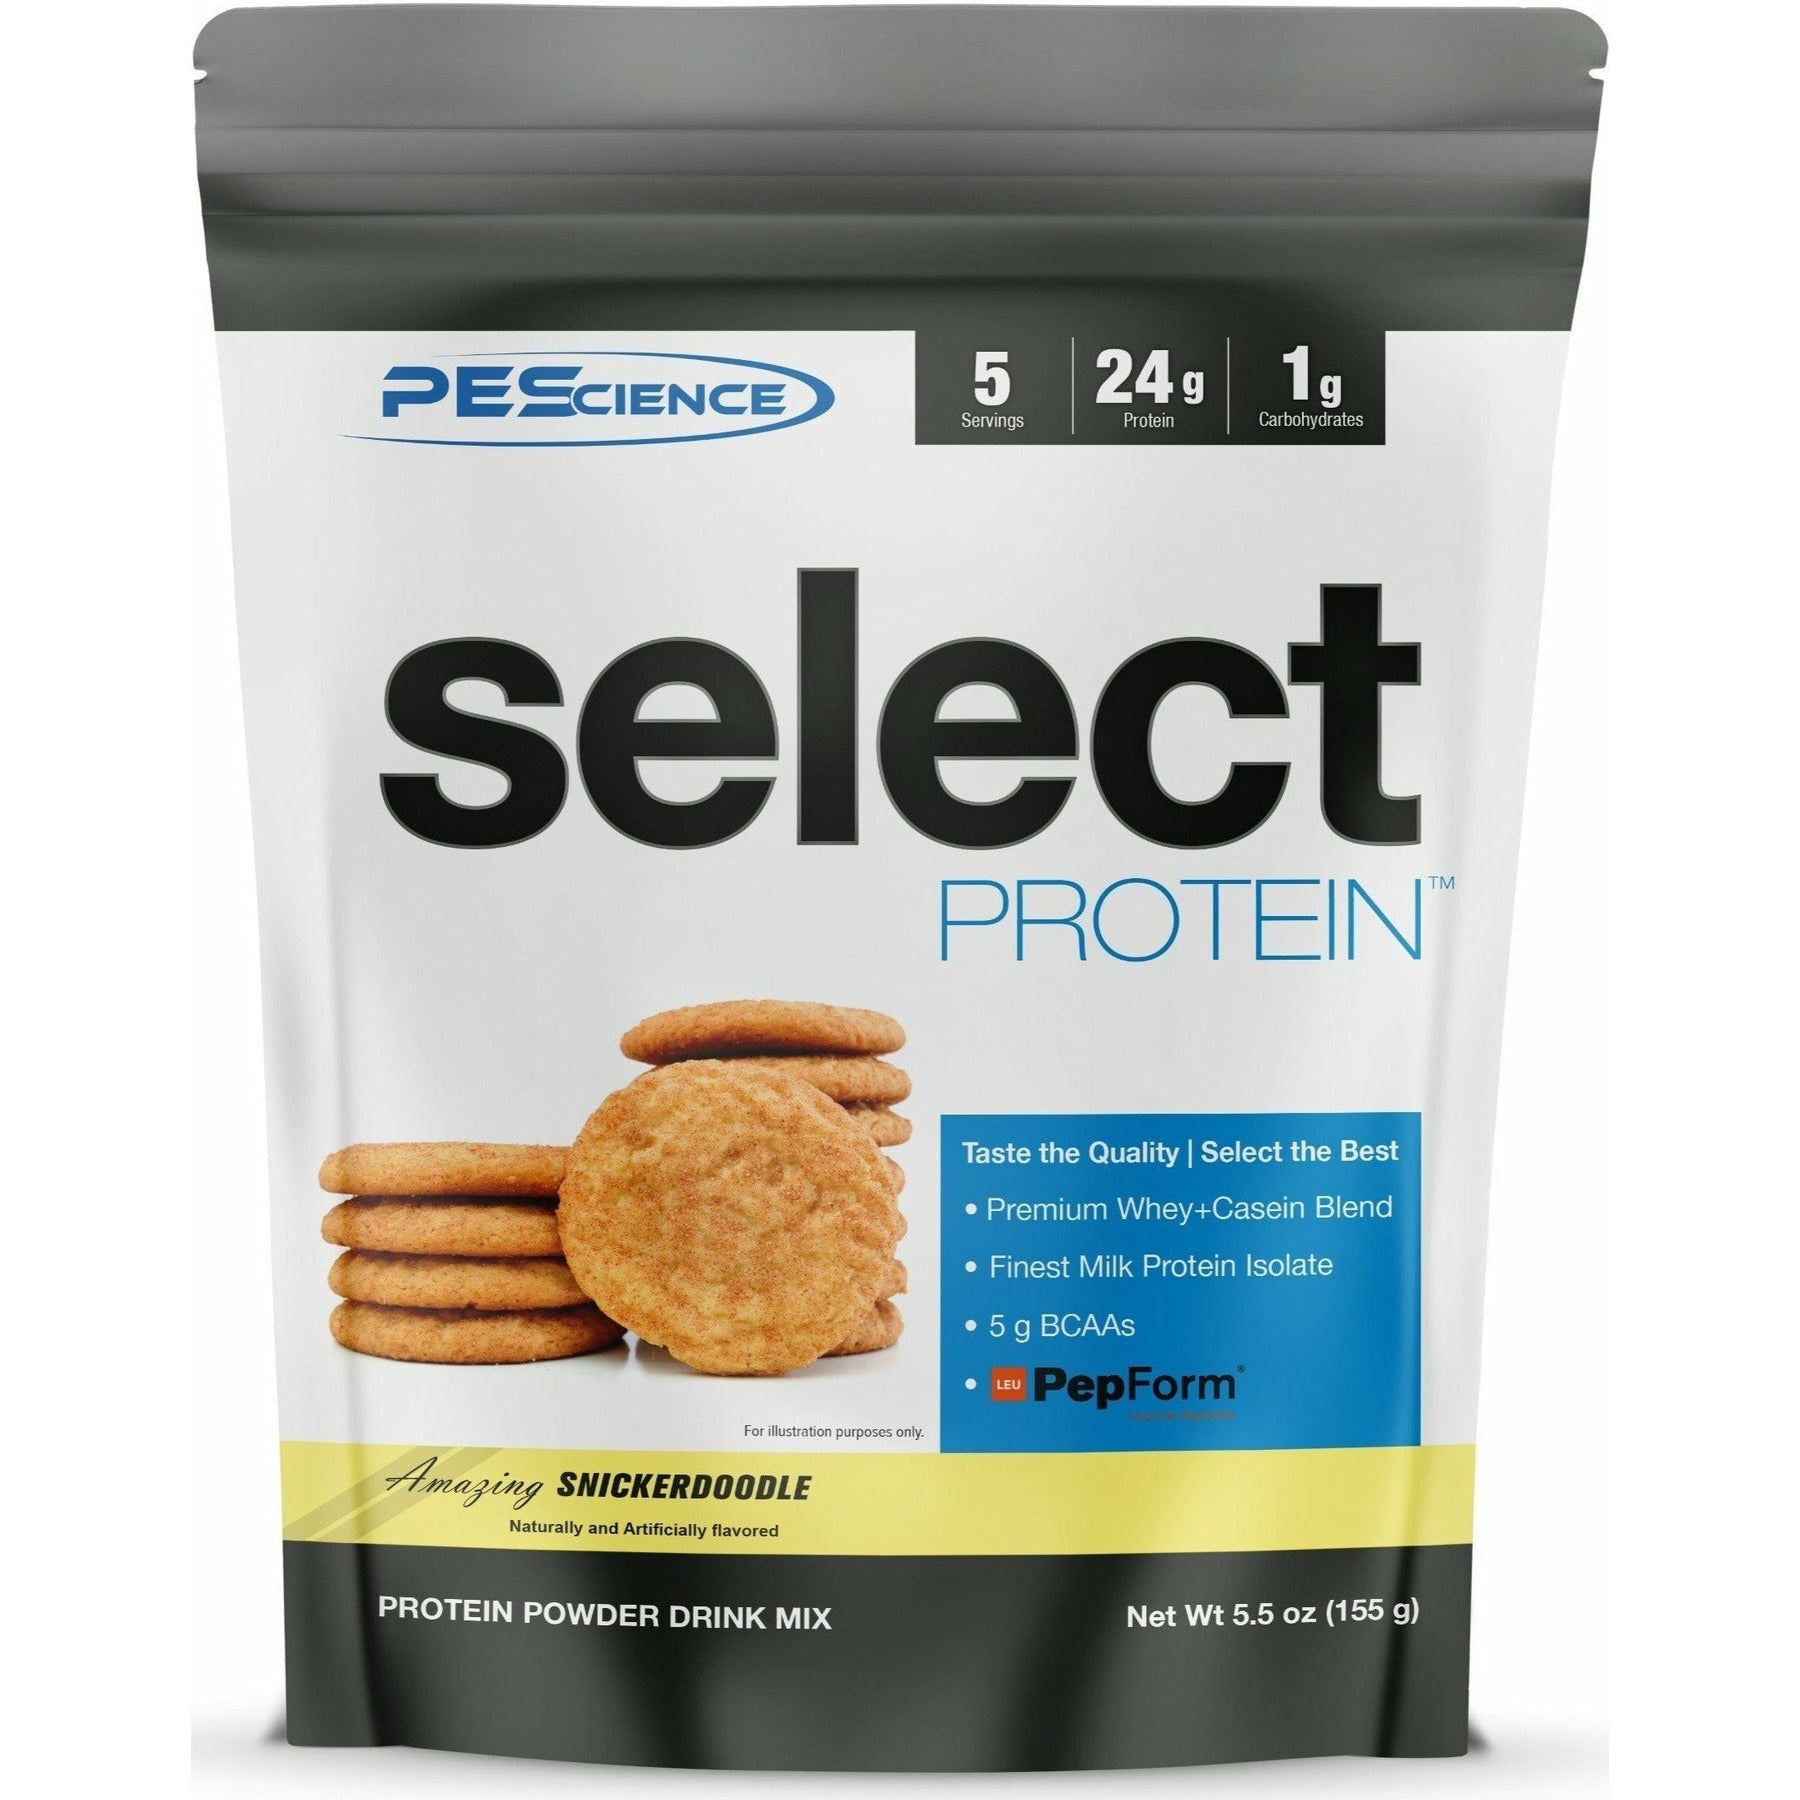 PEScience Select Protein TRIAL SIZE 5 servings PEScience Top Nutrition Canada